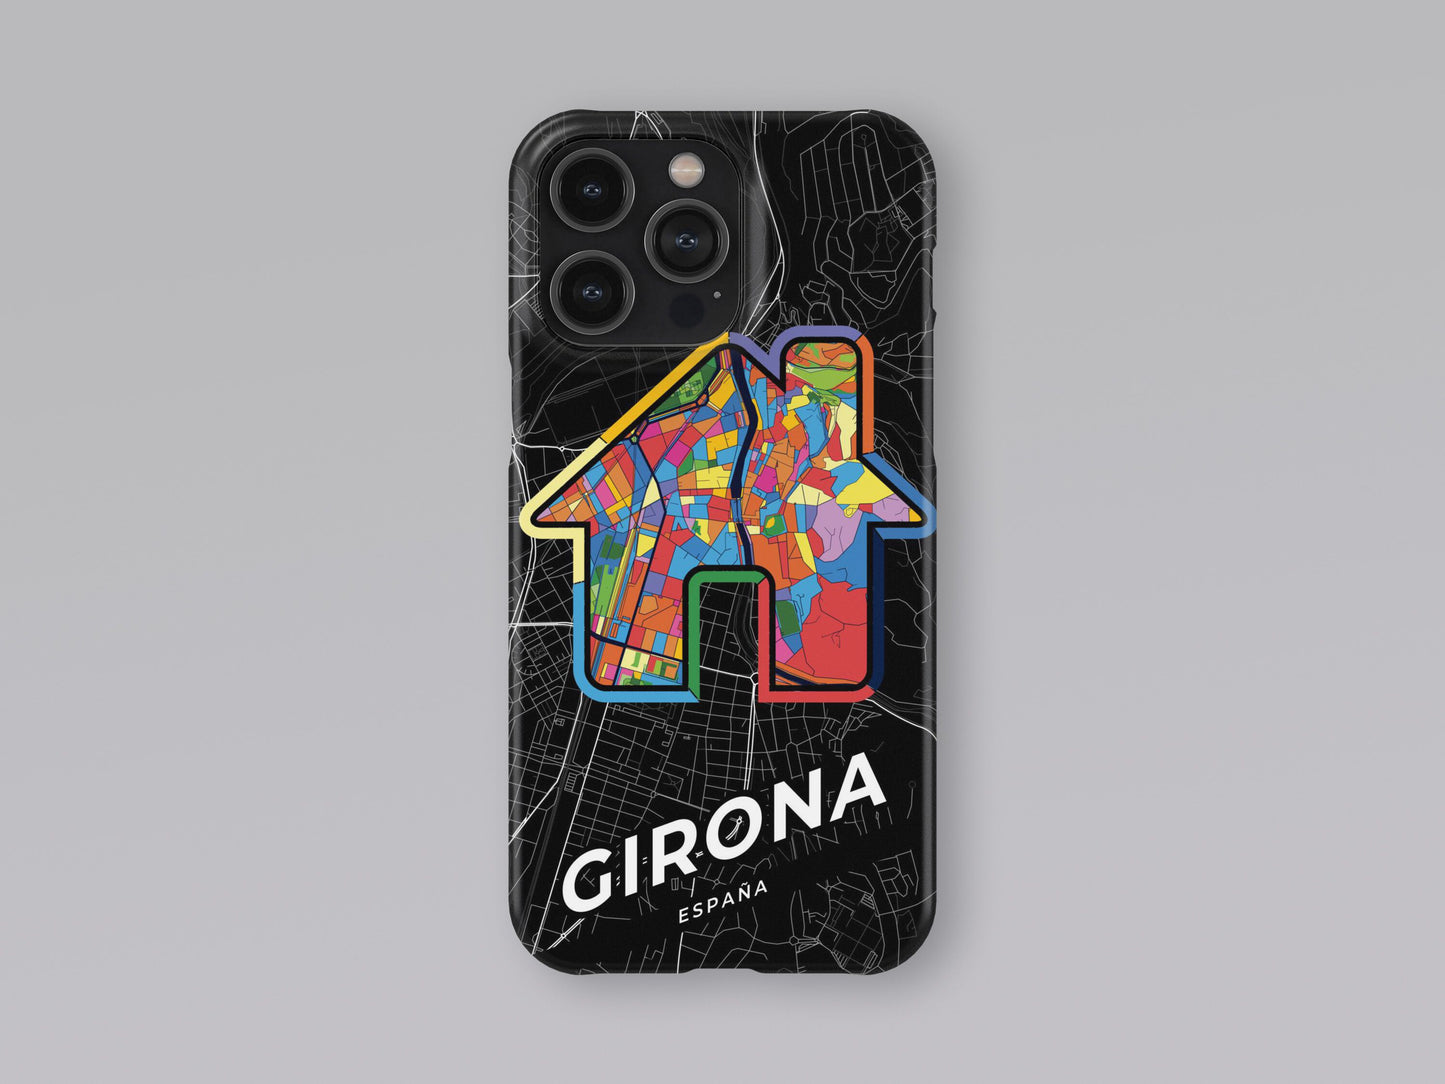 Girona Spain slim phone case with colorful icon. Birthday, wedding or housewarming gift. Couple match cases. 3